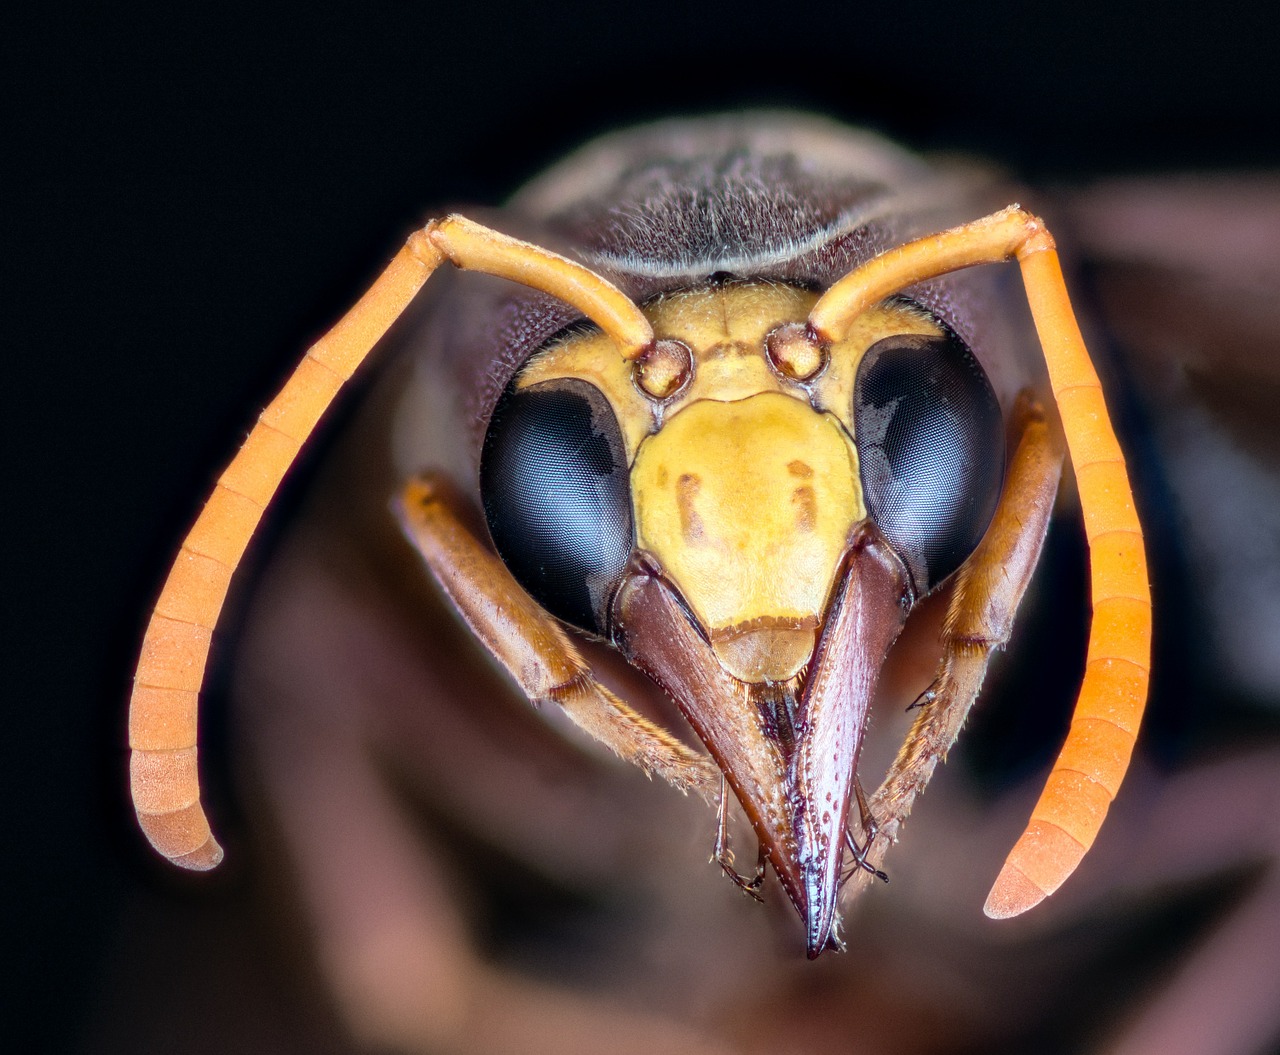 hornet insect macro free photo